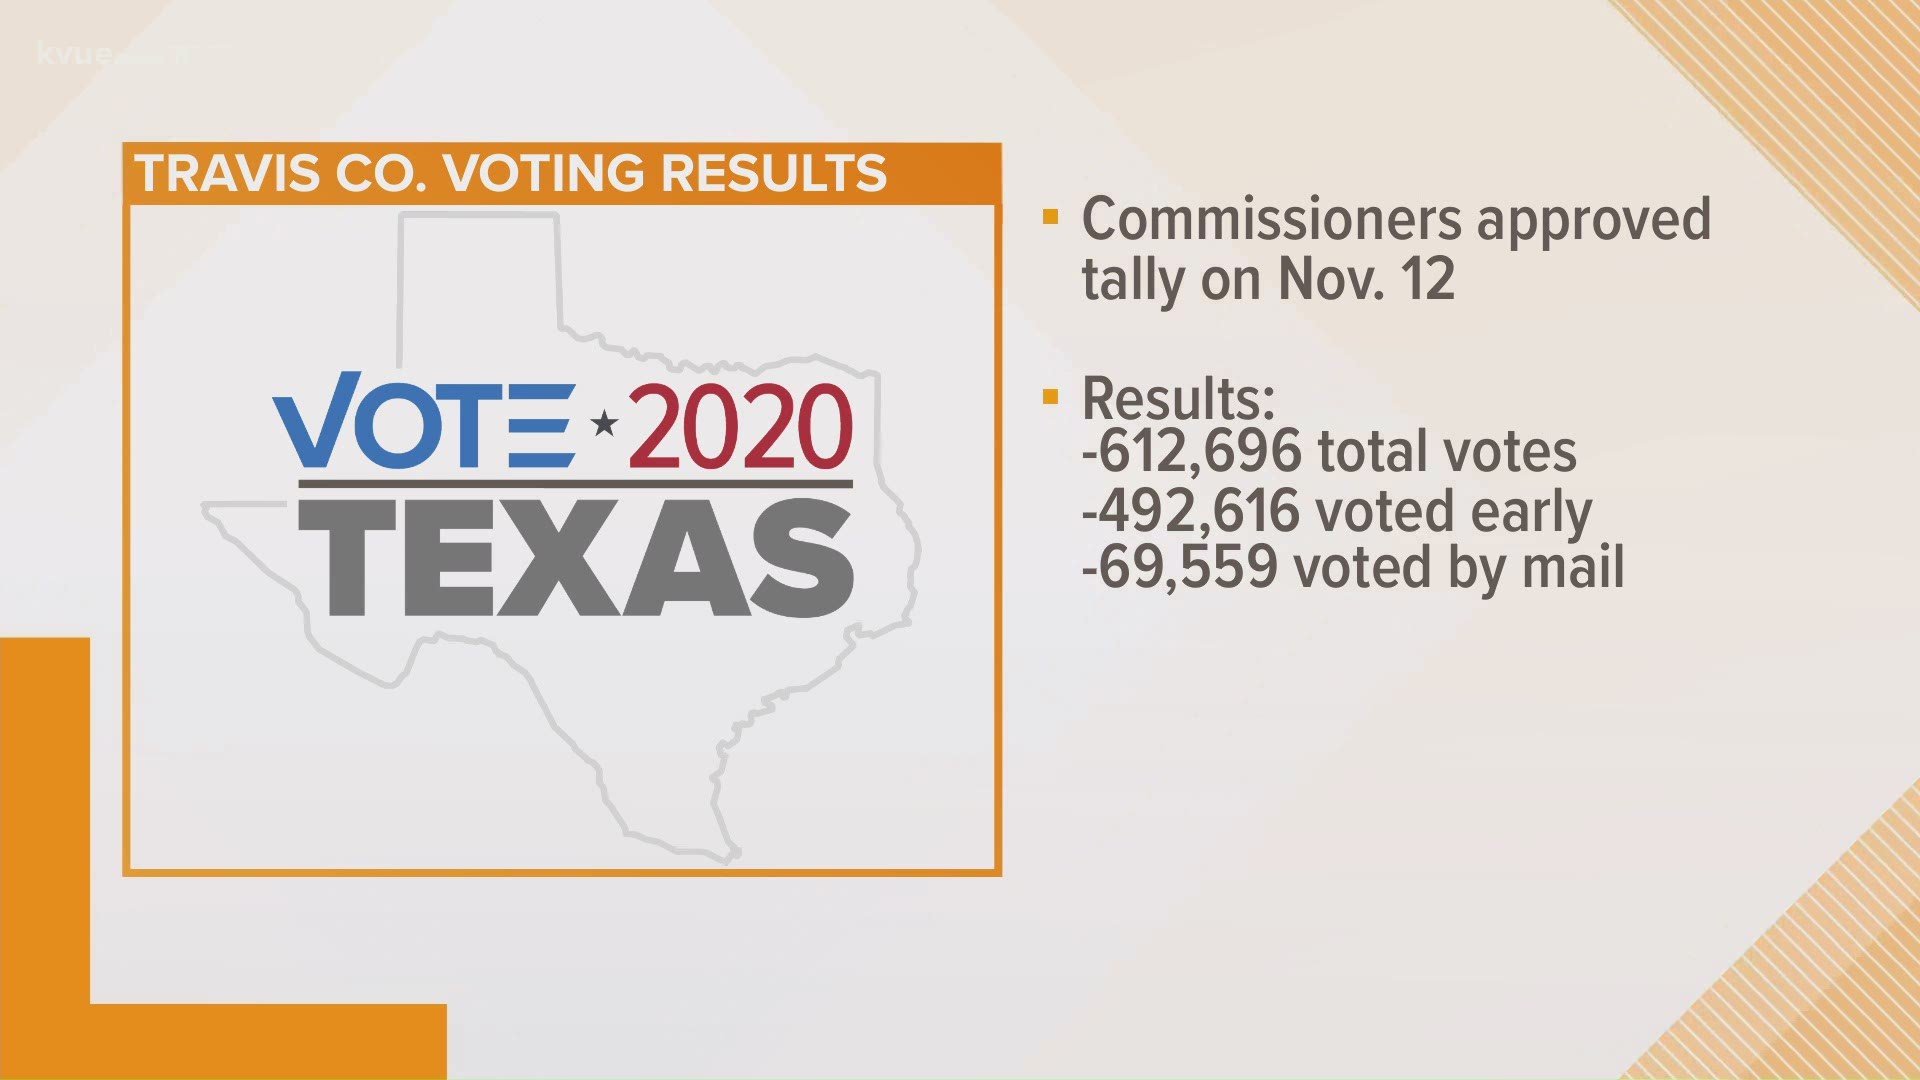 The Travis County commissioners voted Nov. 12 to approve the official ballot count.